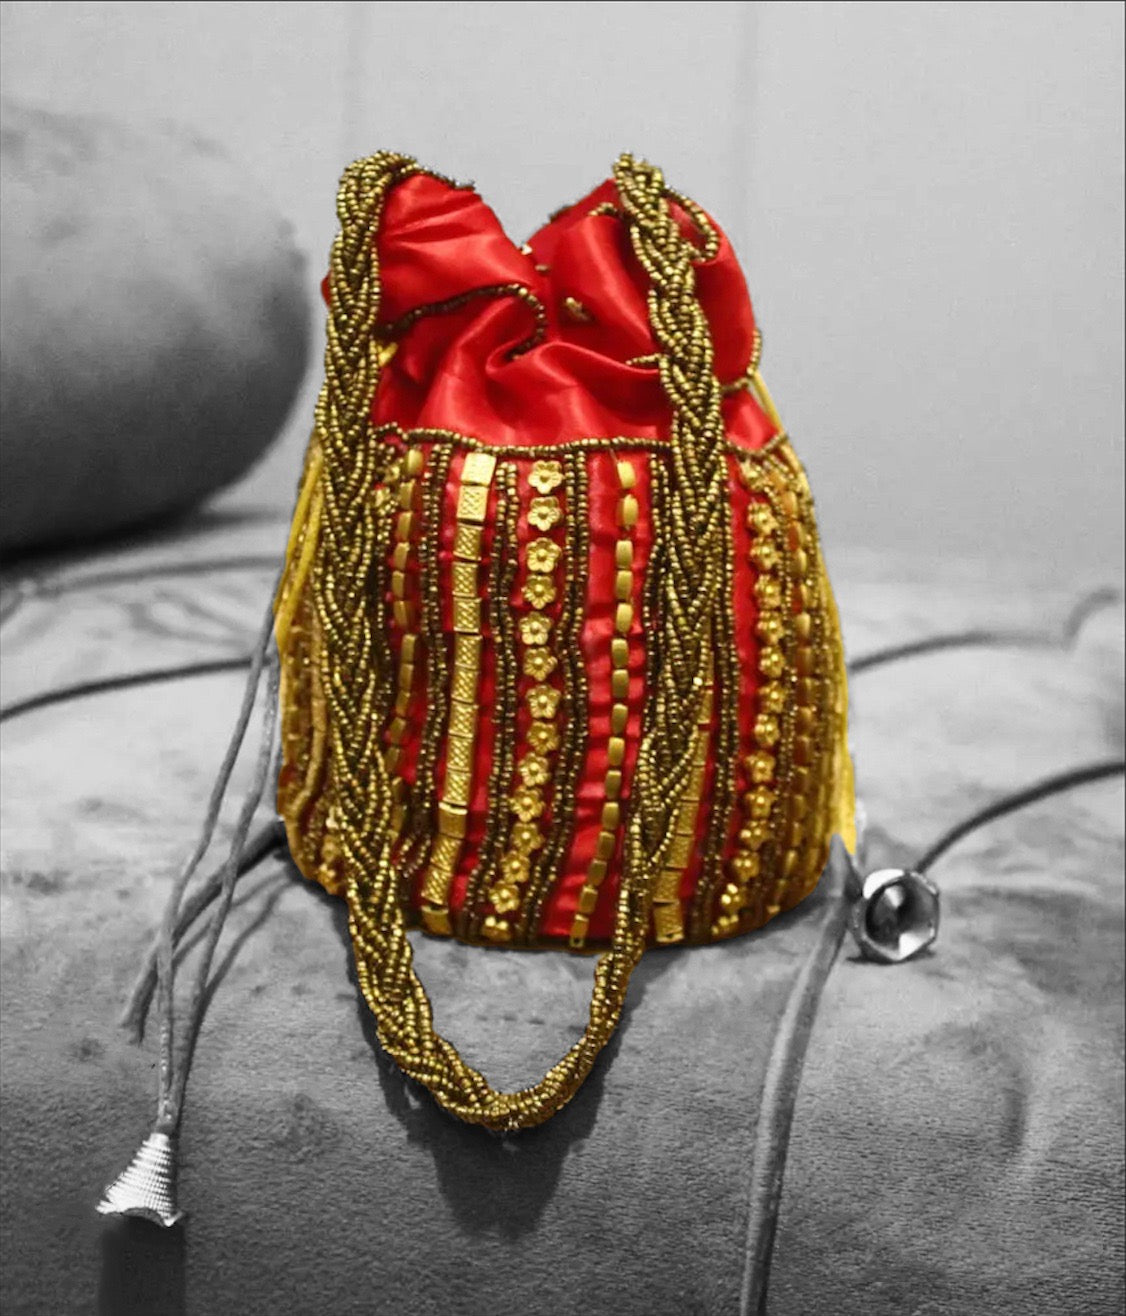 Embroidered pouch/potli bag